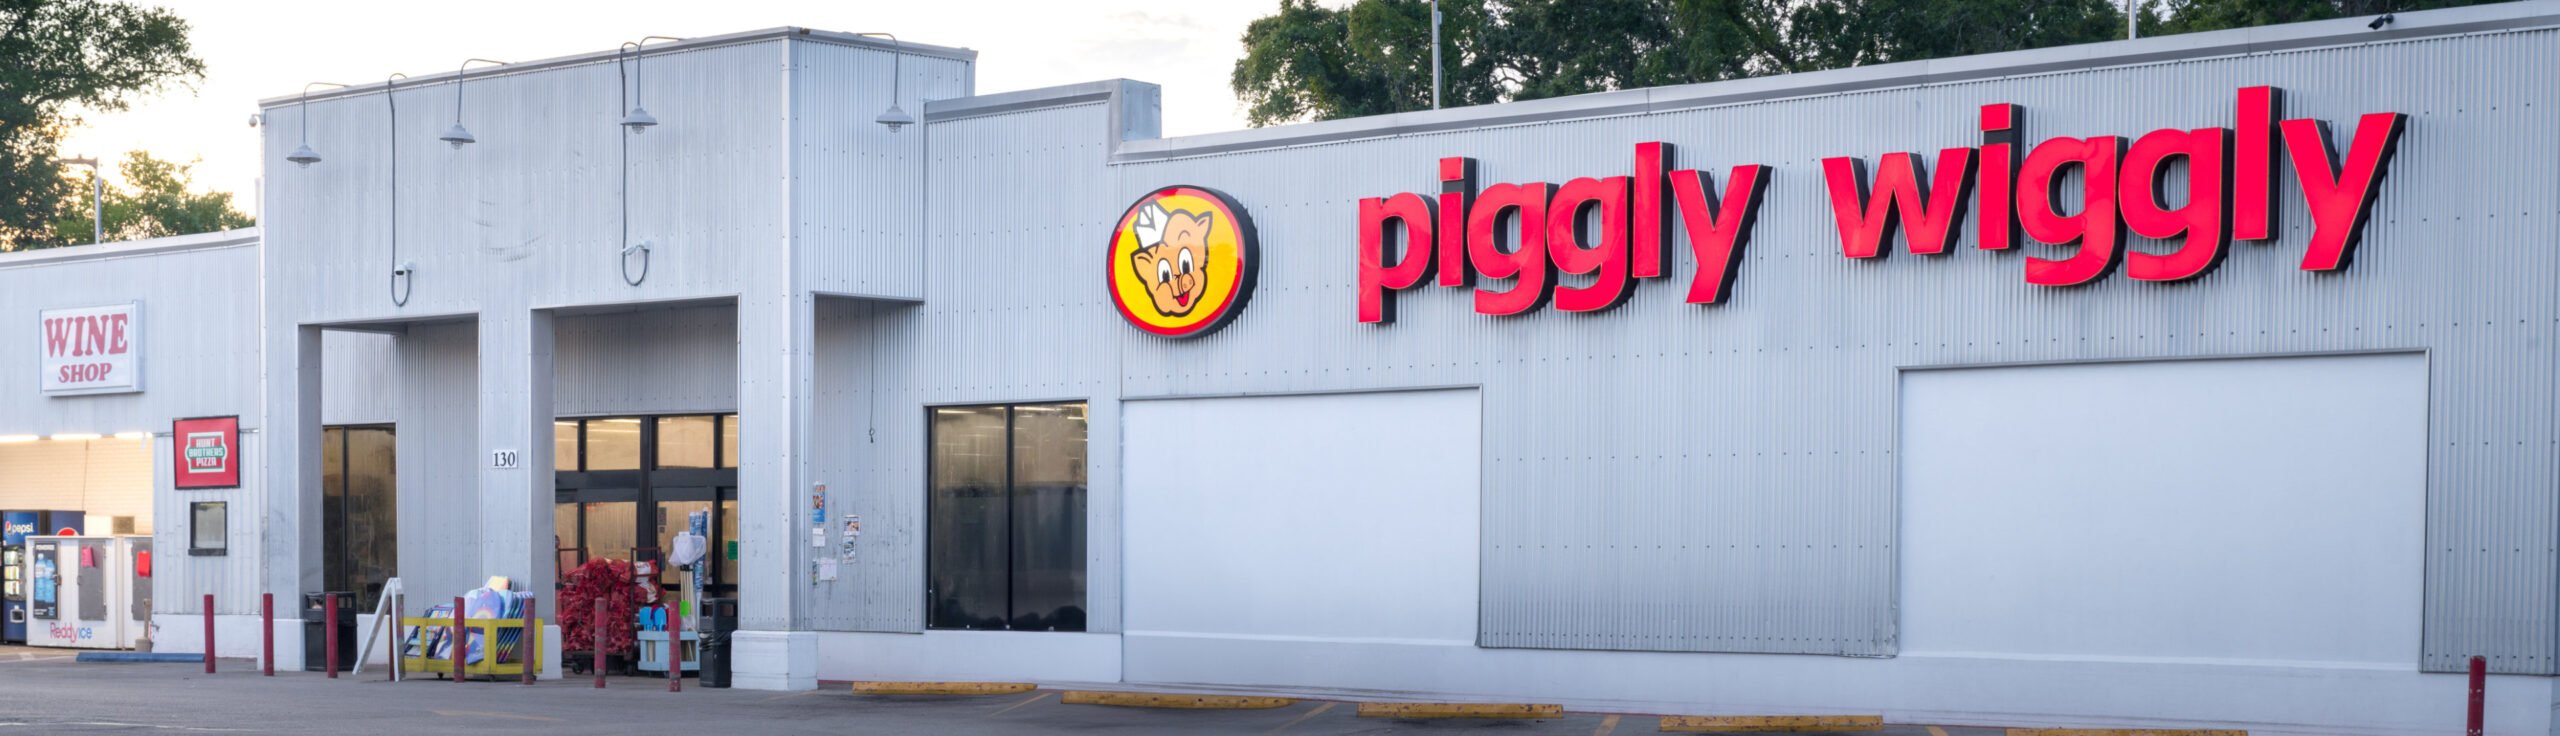 Piggly Wiggly in Apalachicola Florida